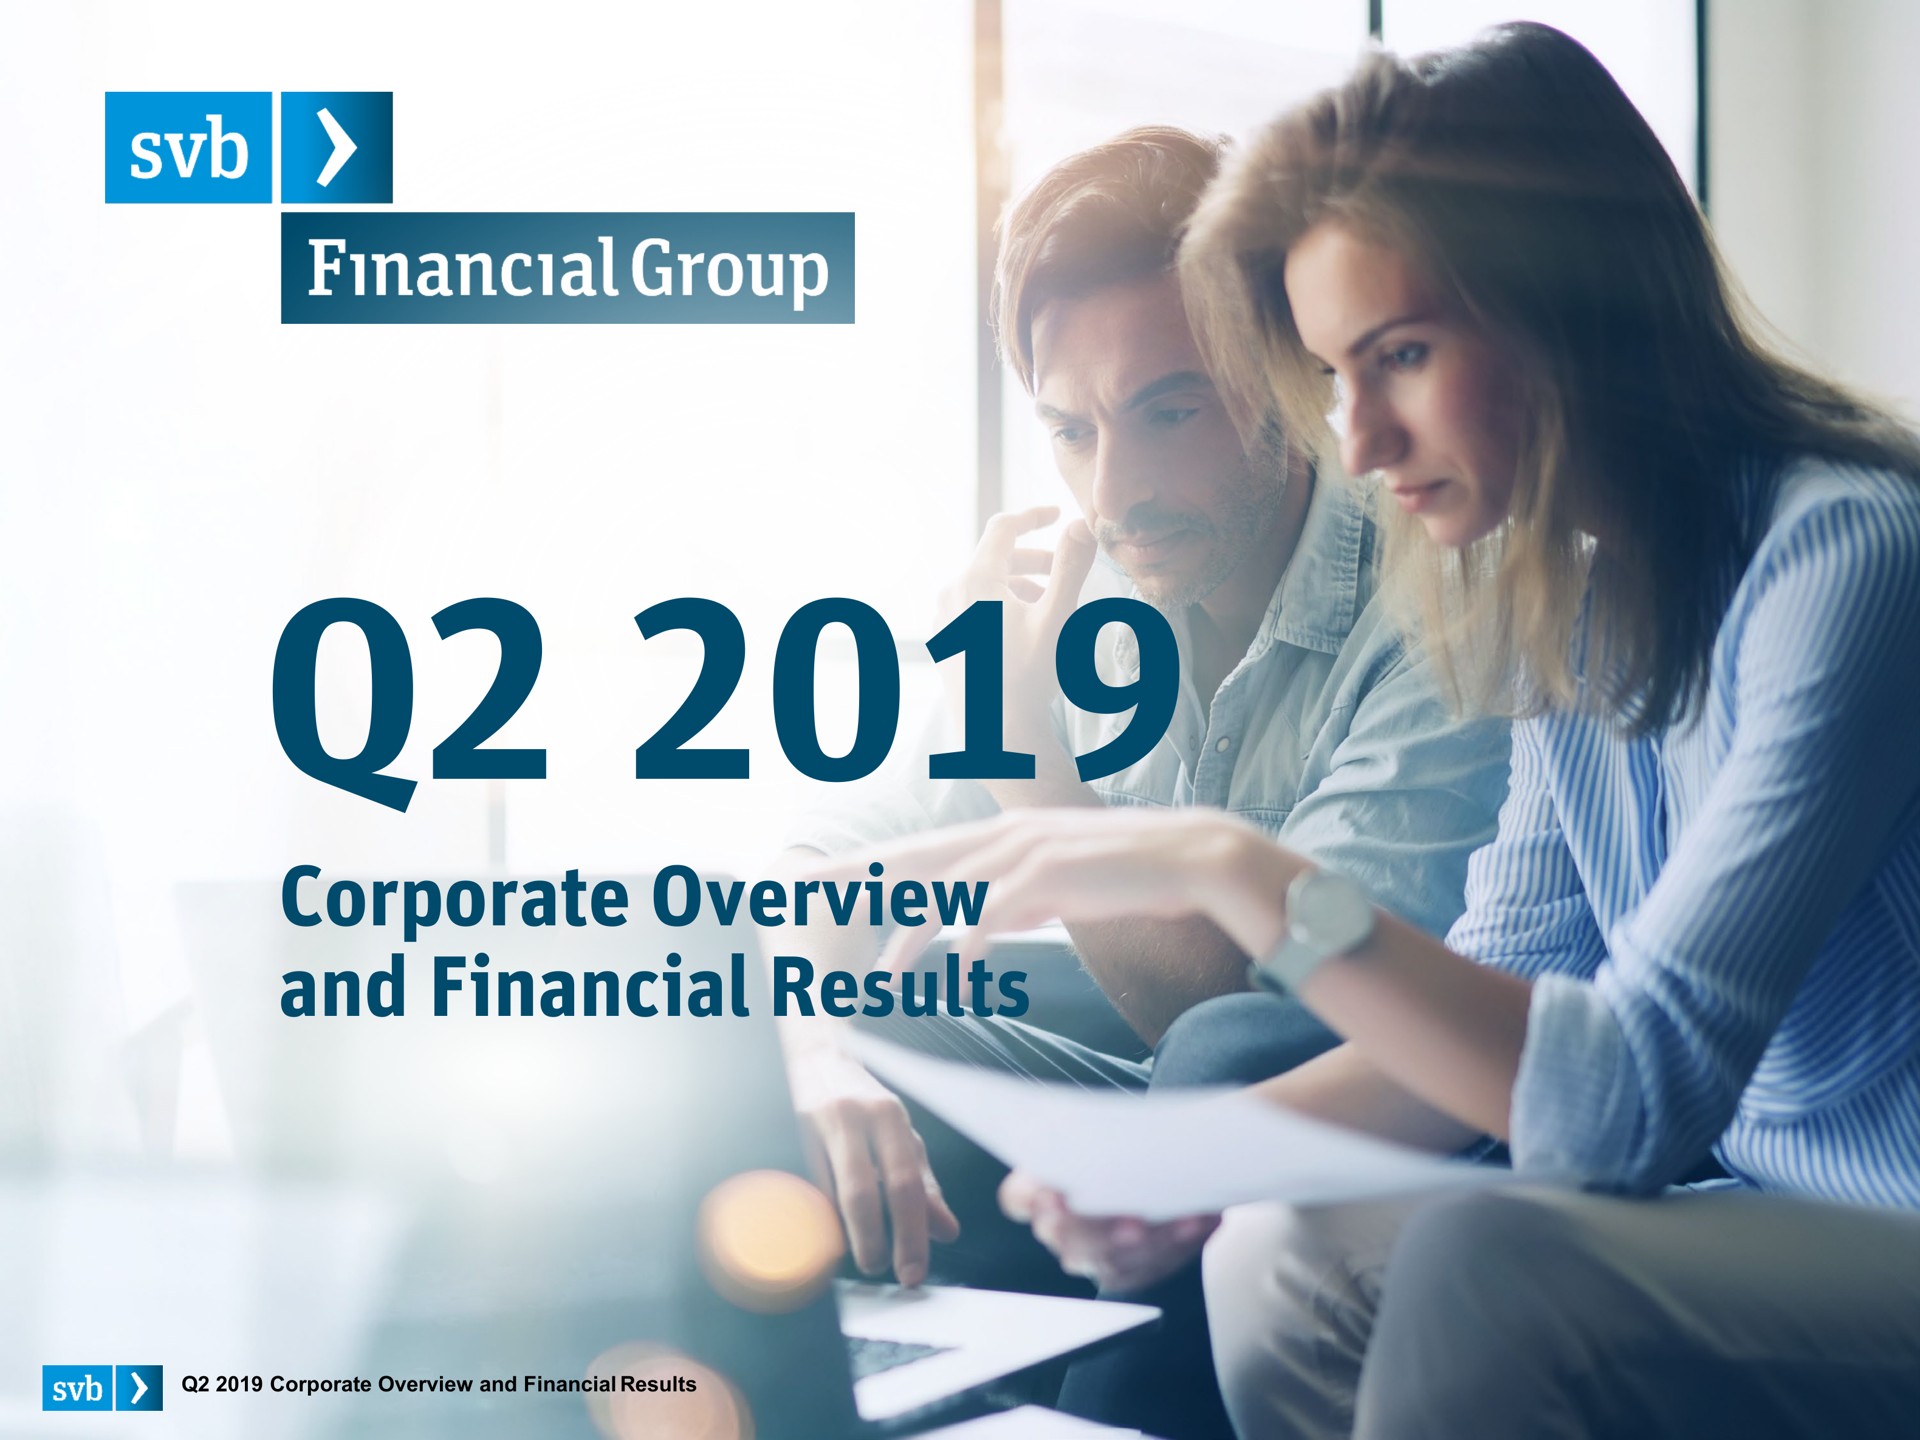 corporate overview and financial results rest | Silicon Valley Bank